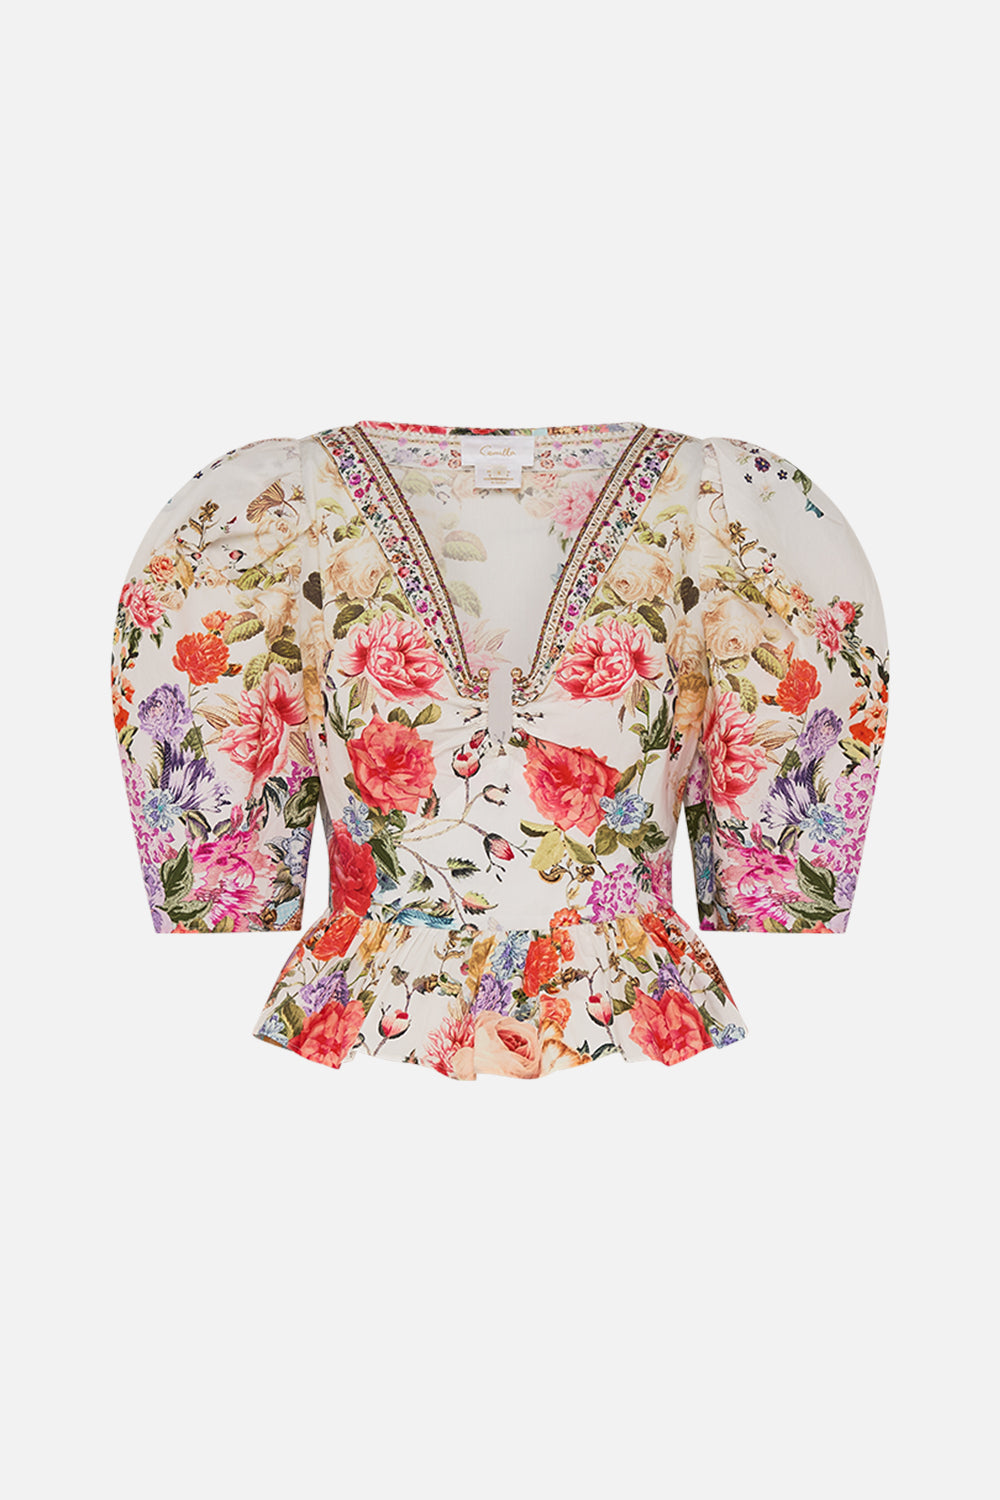 CAMILLA Floral Puff Sleeve Top with Hardware in Sew Yesterday